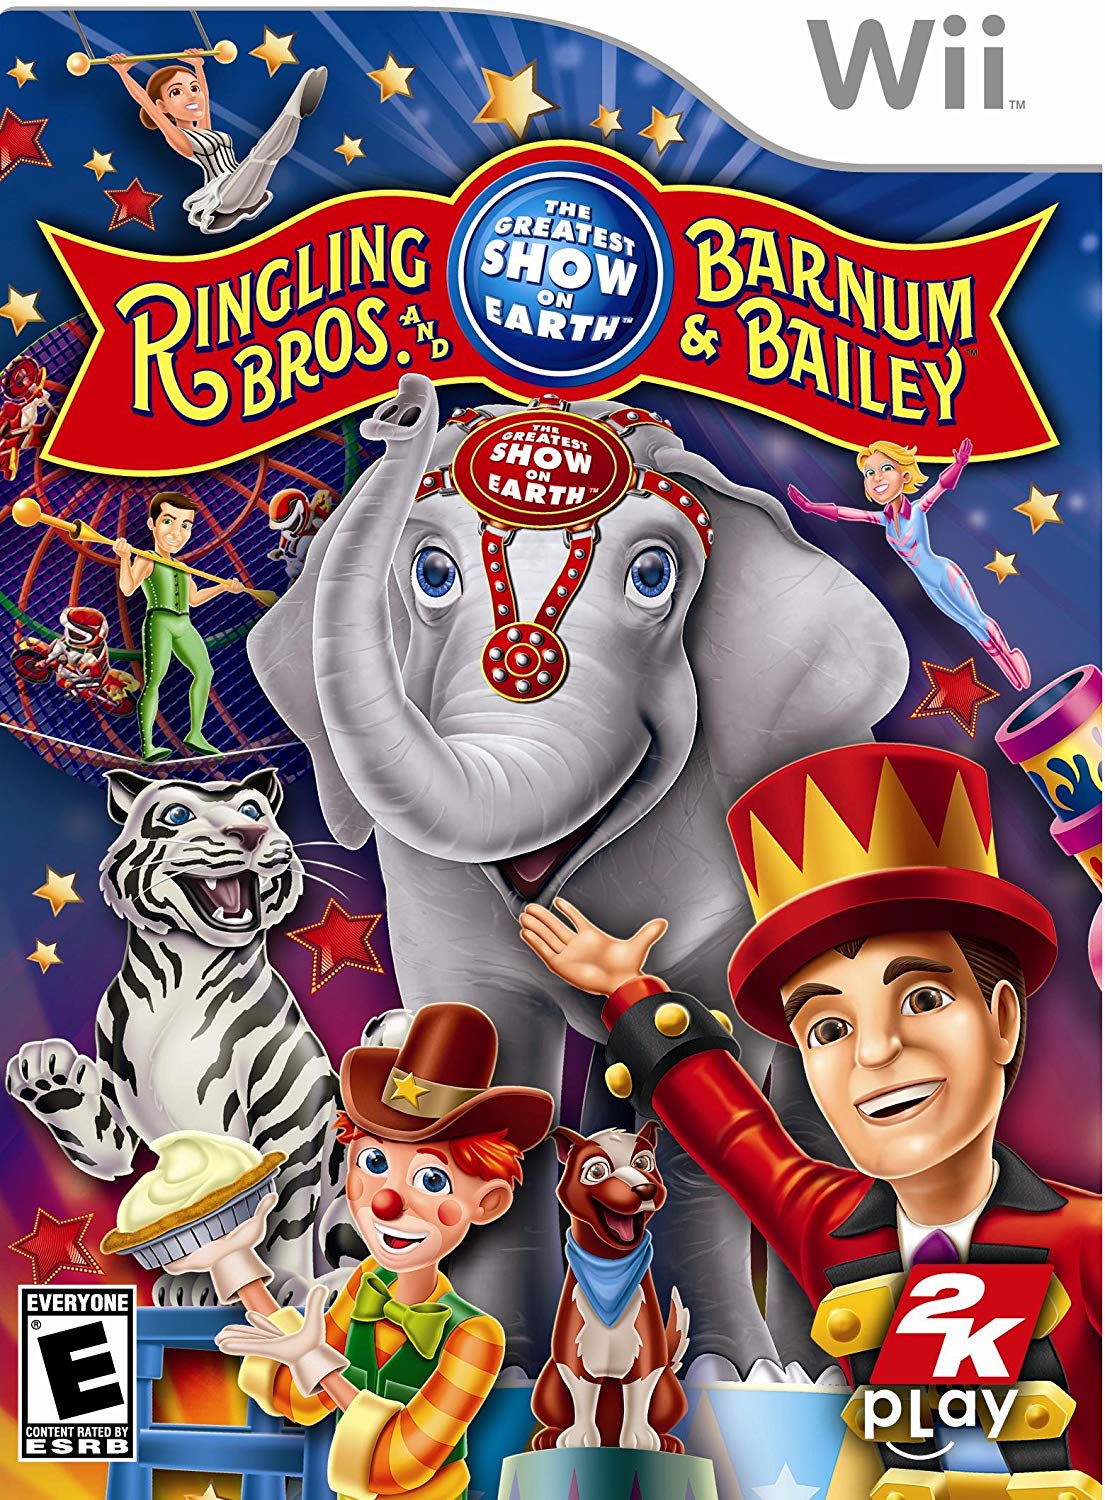 WII: RINGLING BROS AND BARNUM AND BAILEY (NEW)